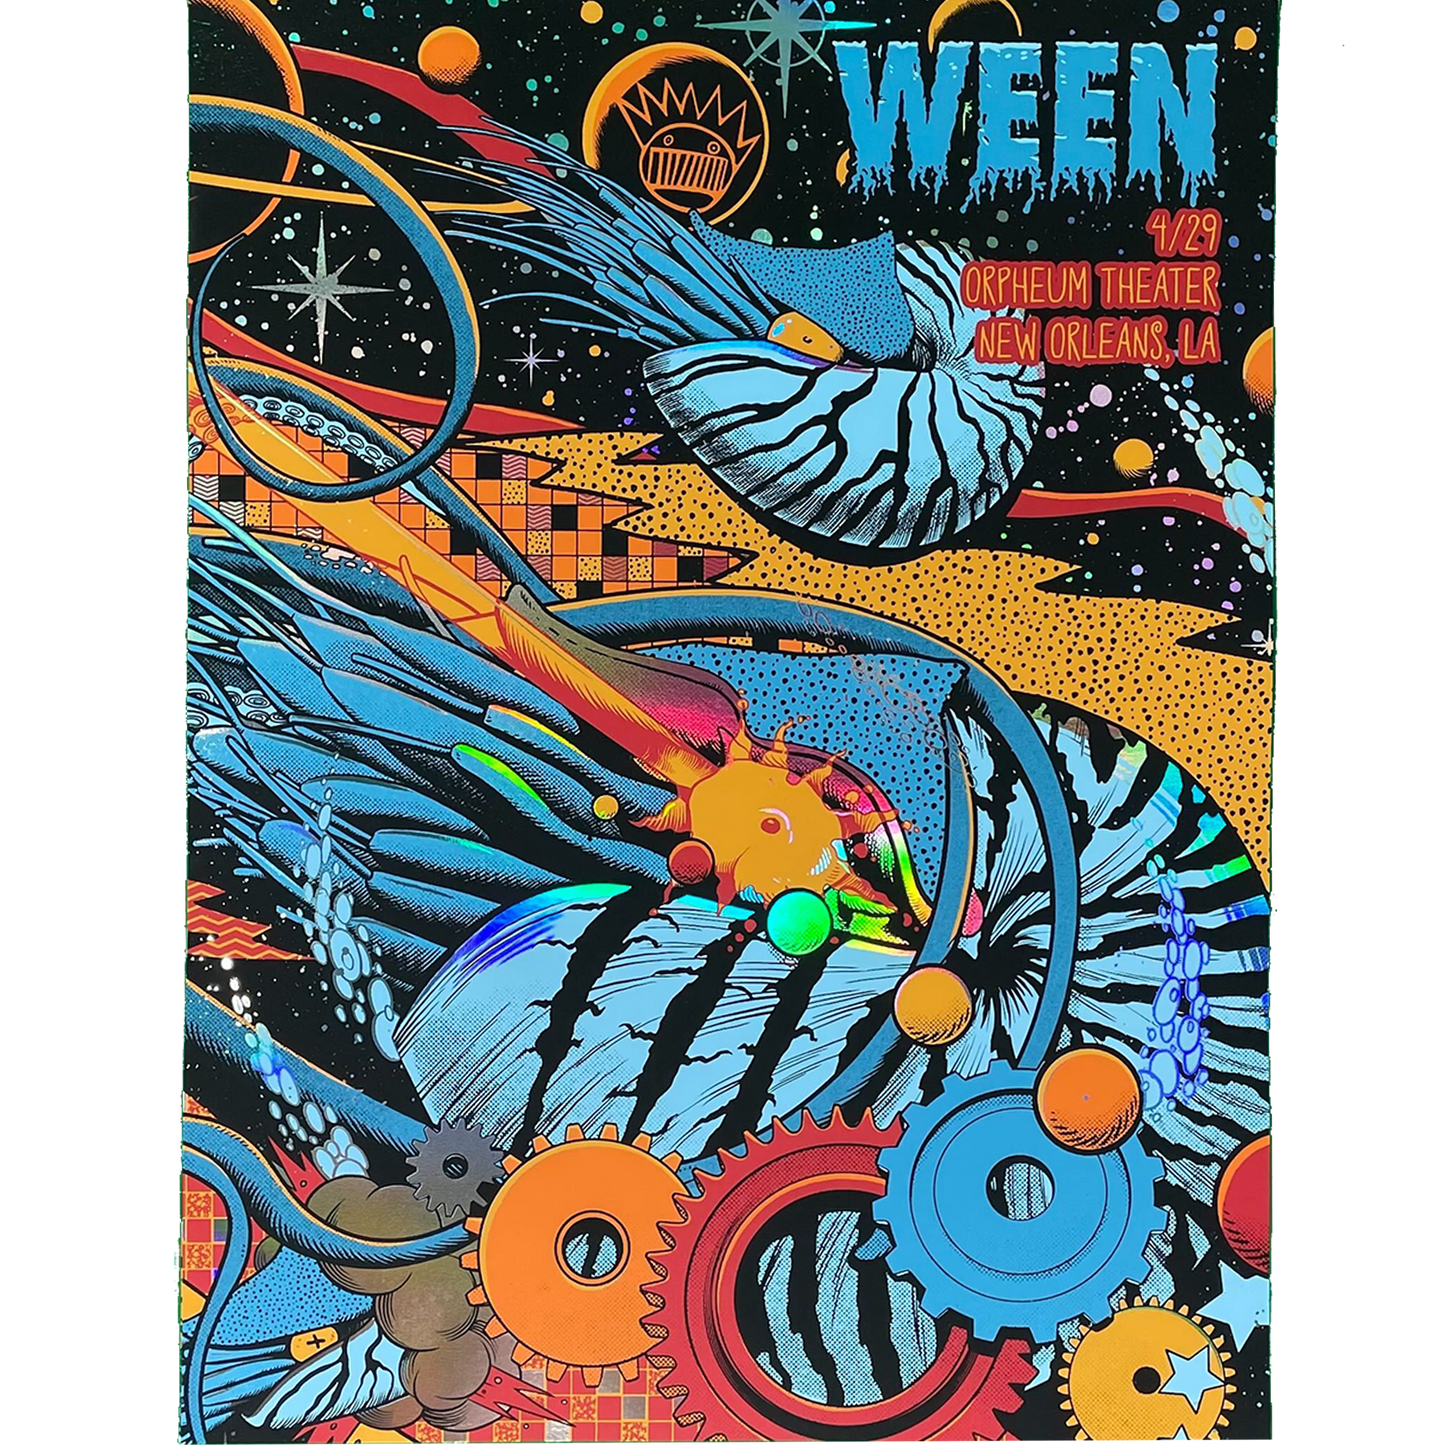 New Orleans, LA – 4/29/23 Show Poster by Pedro Correa - Web Exclusive Variant